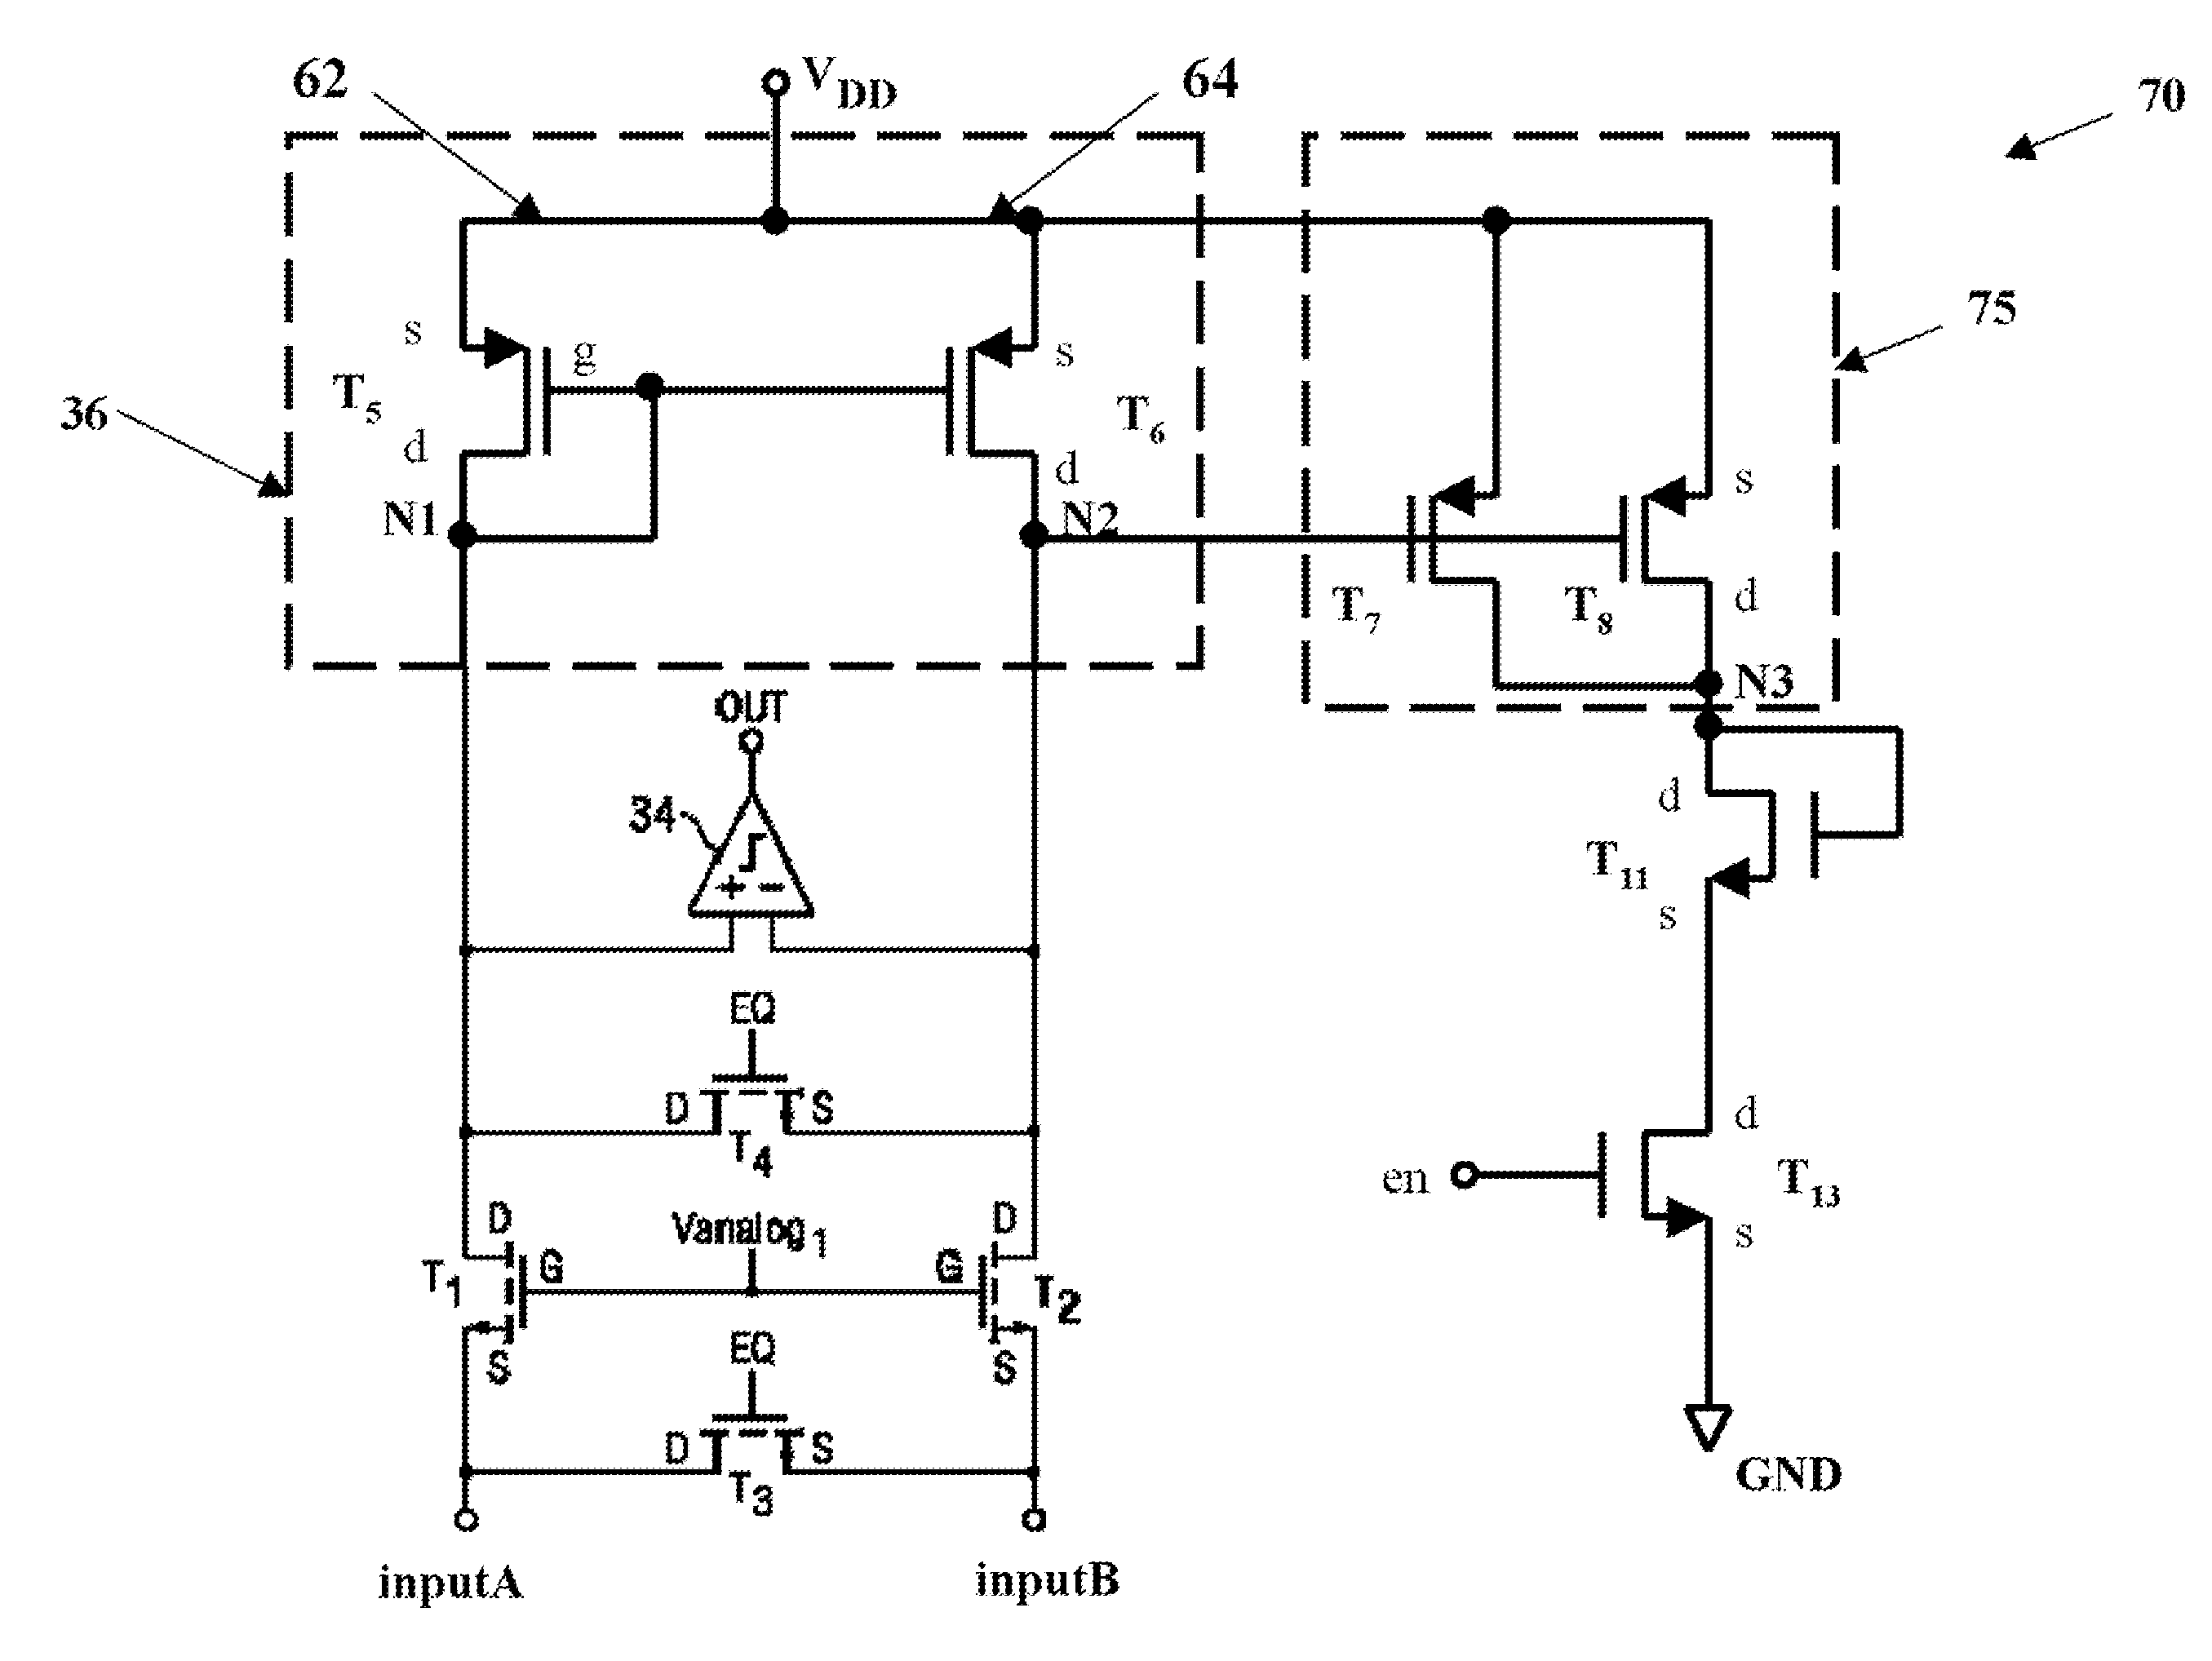 Integrated circuit, method of operating an integrated circuit, method of manufacturing an integrated circuit, memory module, stackable memory module